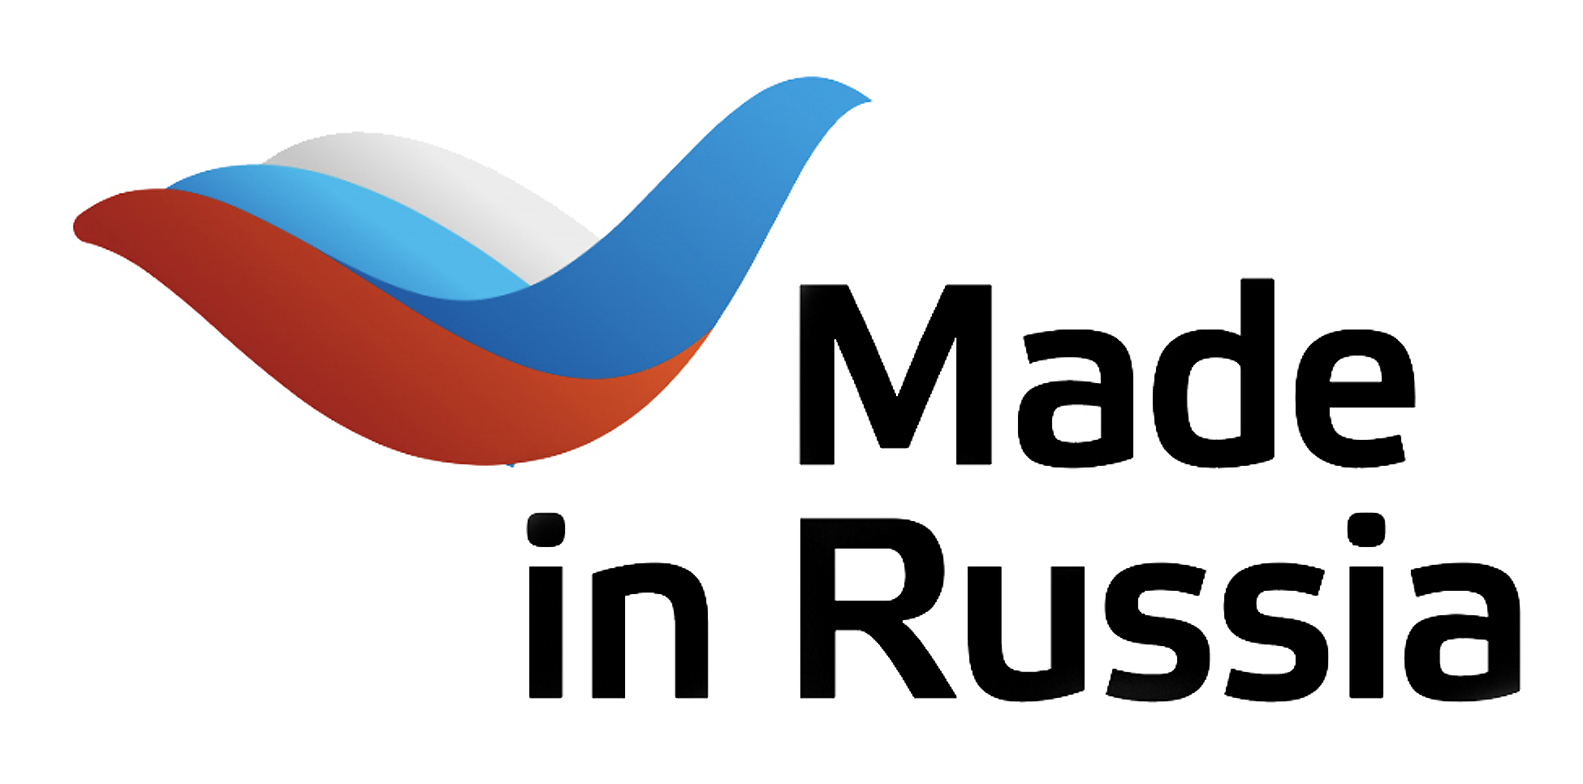 In russia в россии. Made in Russia бренд. Значок made in Russia. Сделано в России. Сделано в России лого.